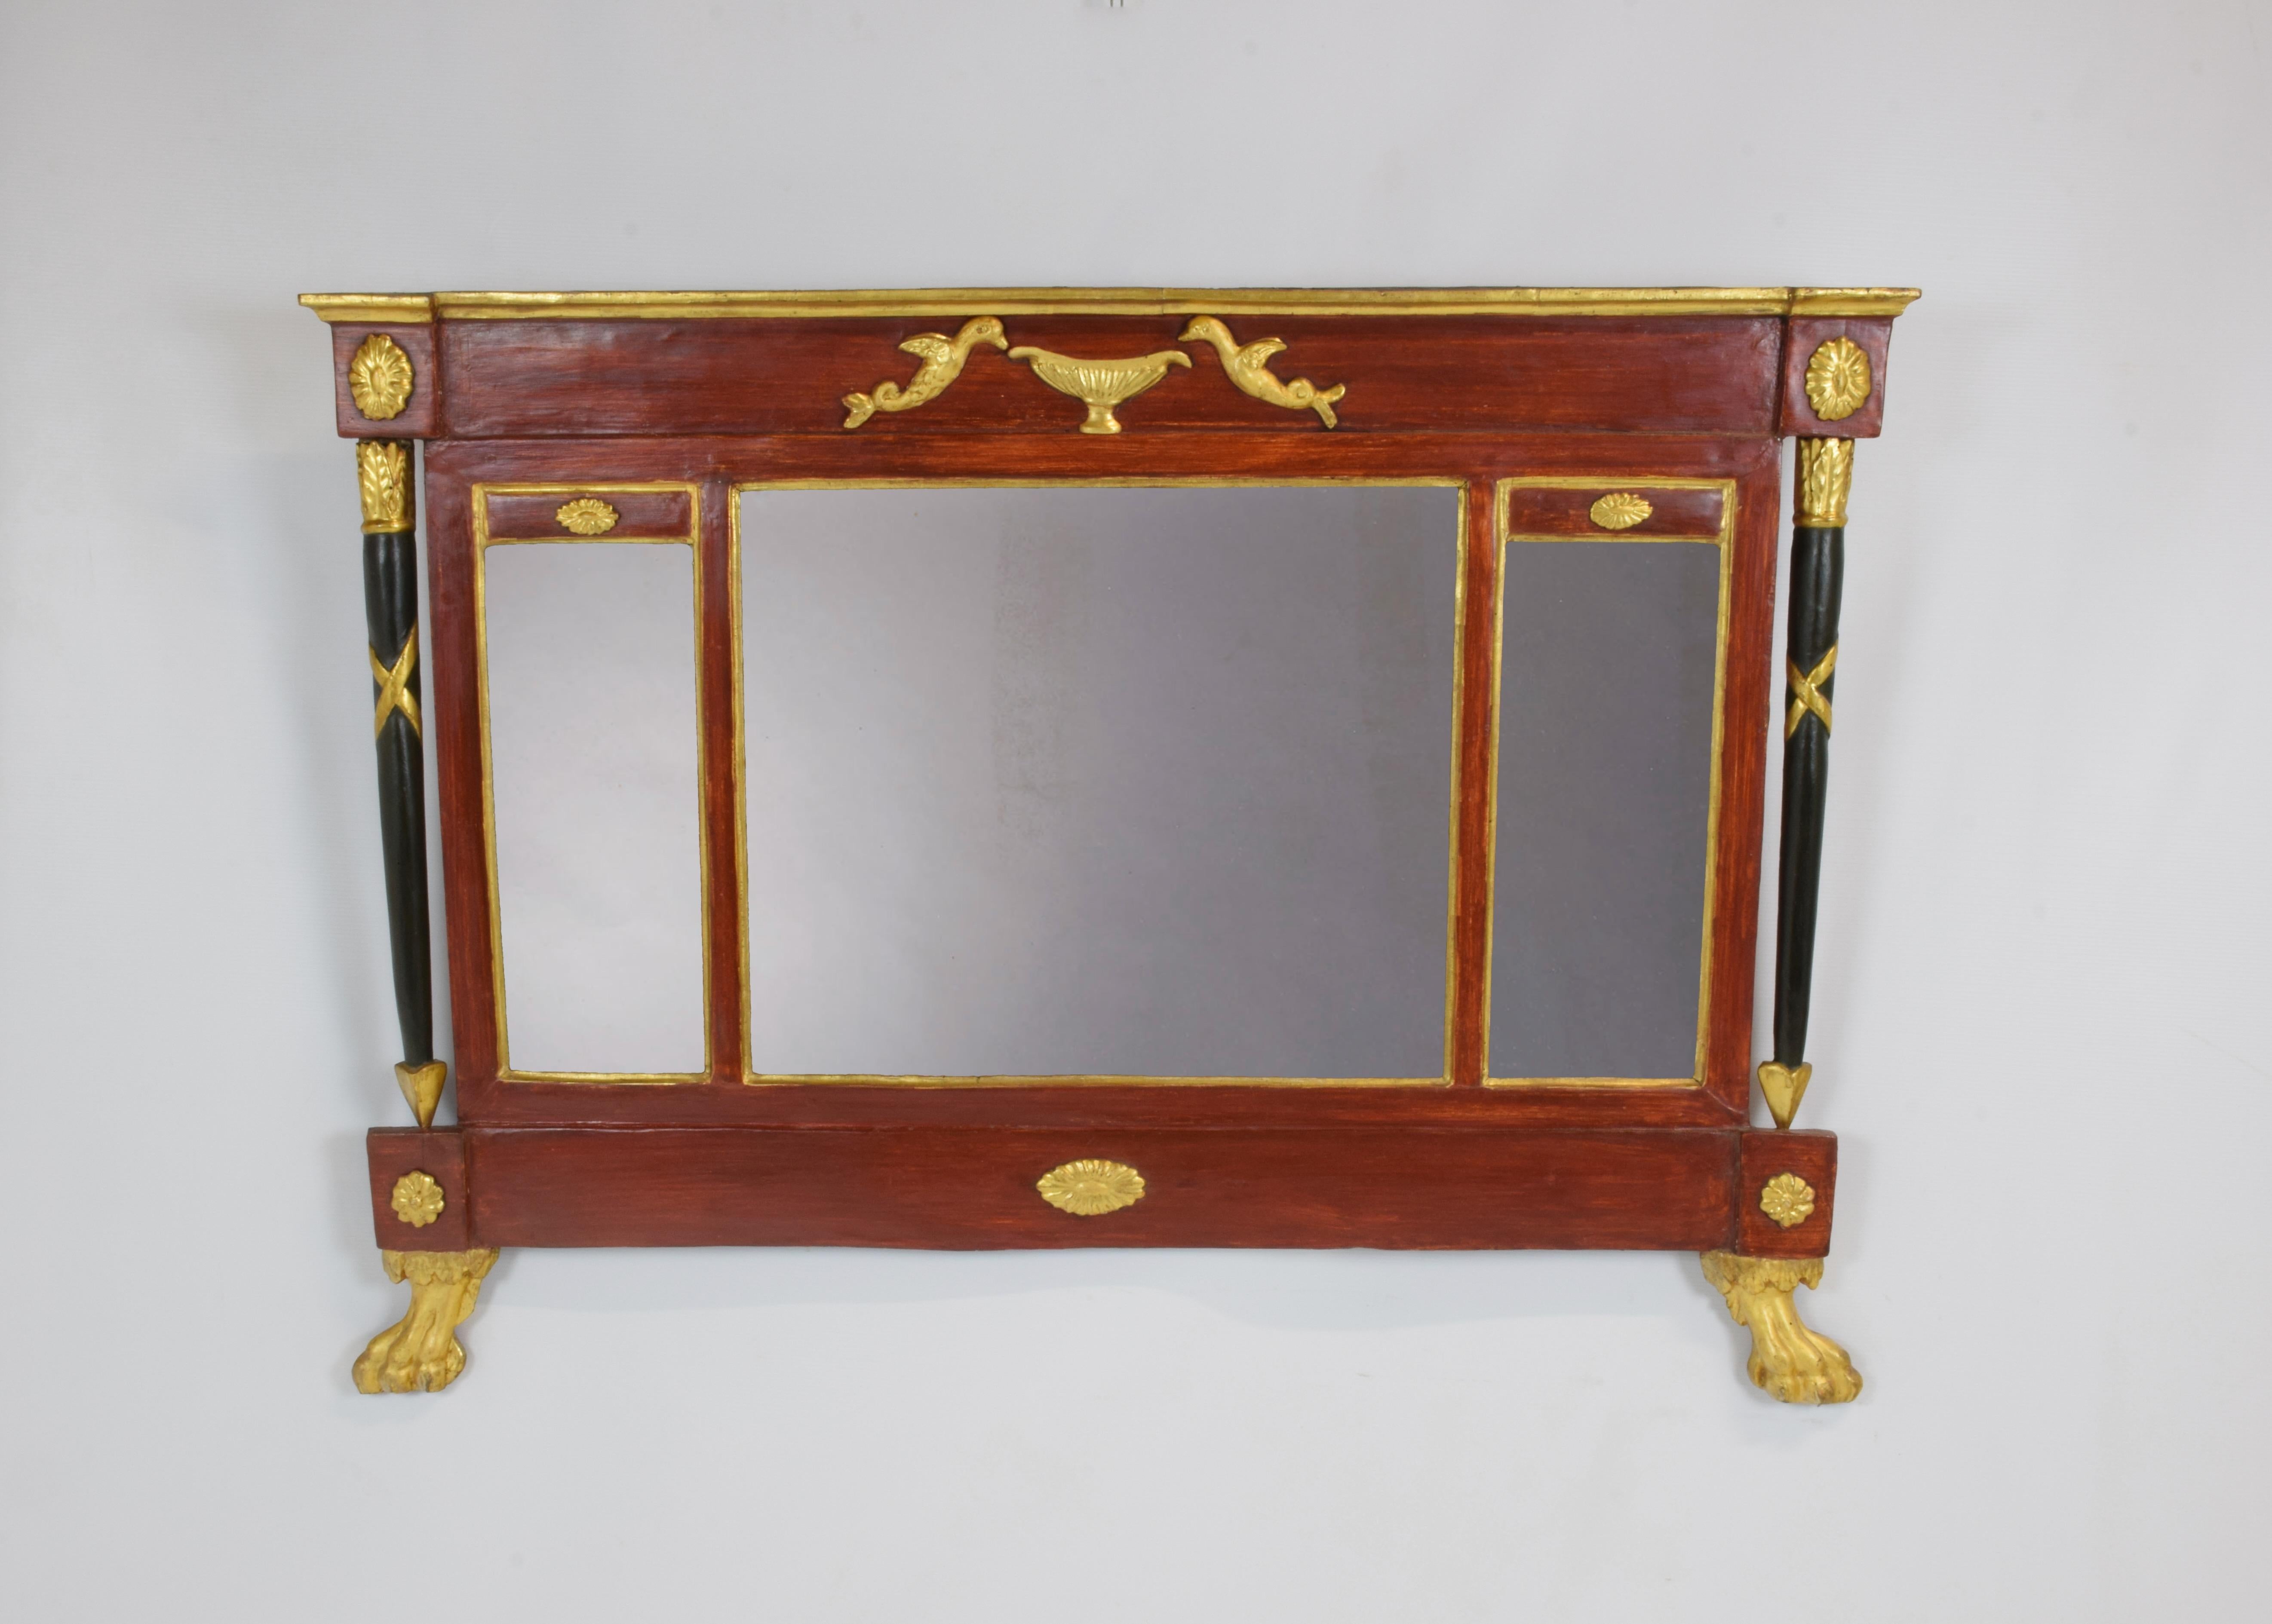 Rectangular mirror born to be placed on the fireplace. The mirror is divided into three original parts separated by frames with a golden border. Original the color that recalls the famous Pompeian red. On the sides two black arrow-shaped columns